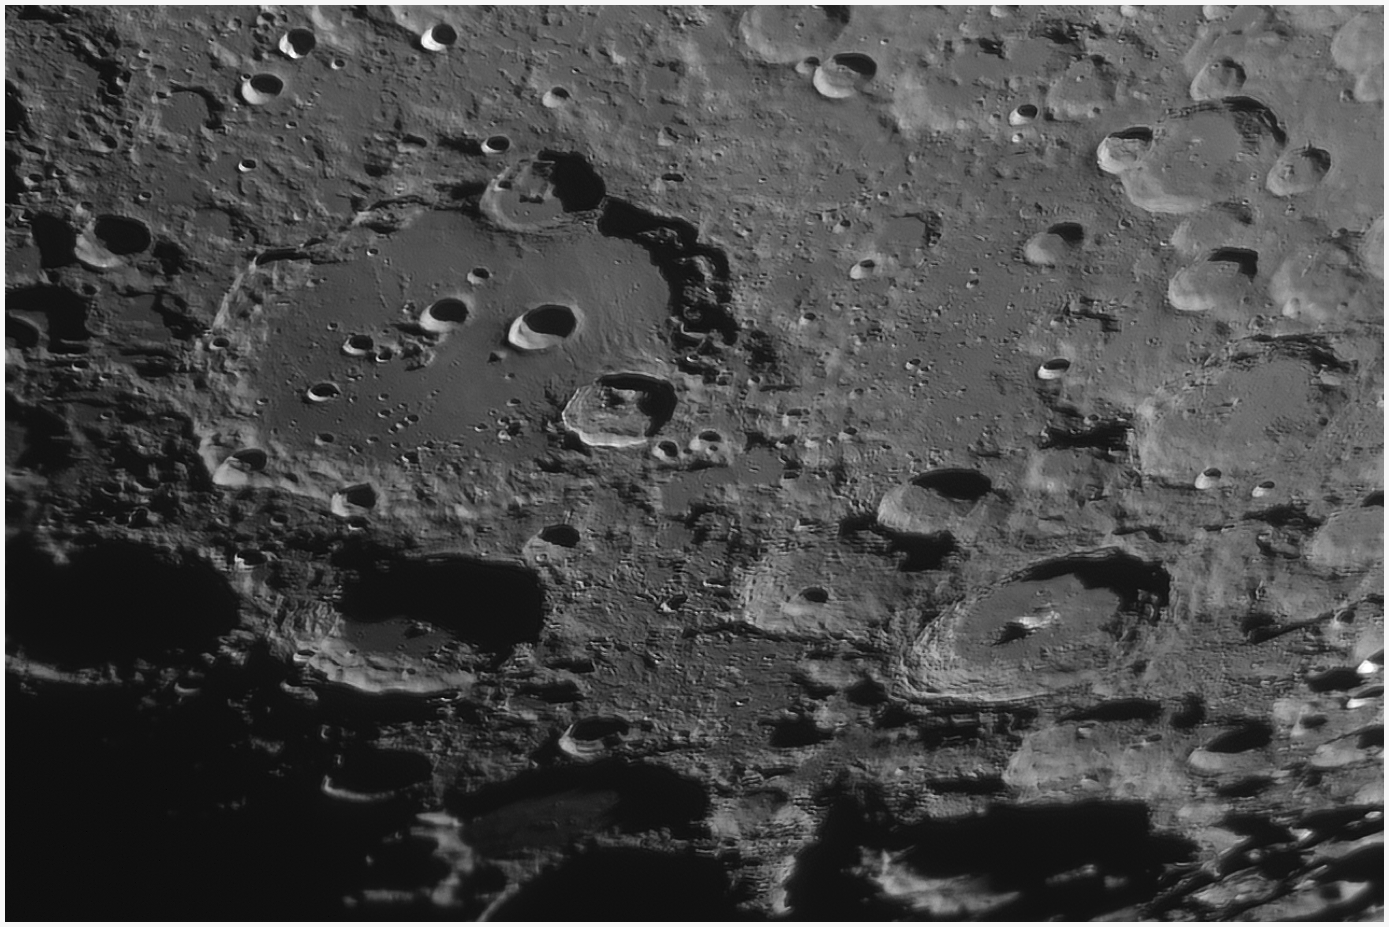 642aee0521cc8_Clavius_2023-03-31-Gain122_Exposure3.6ms__.png.a9fc59b2ded44d0bf7db2218e869a50c.png